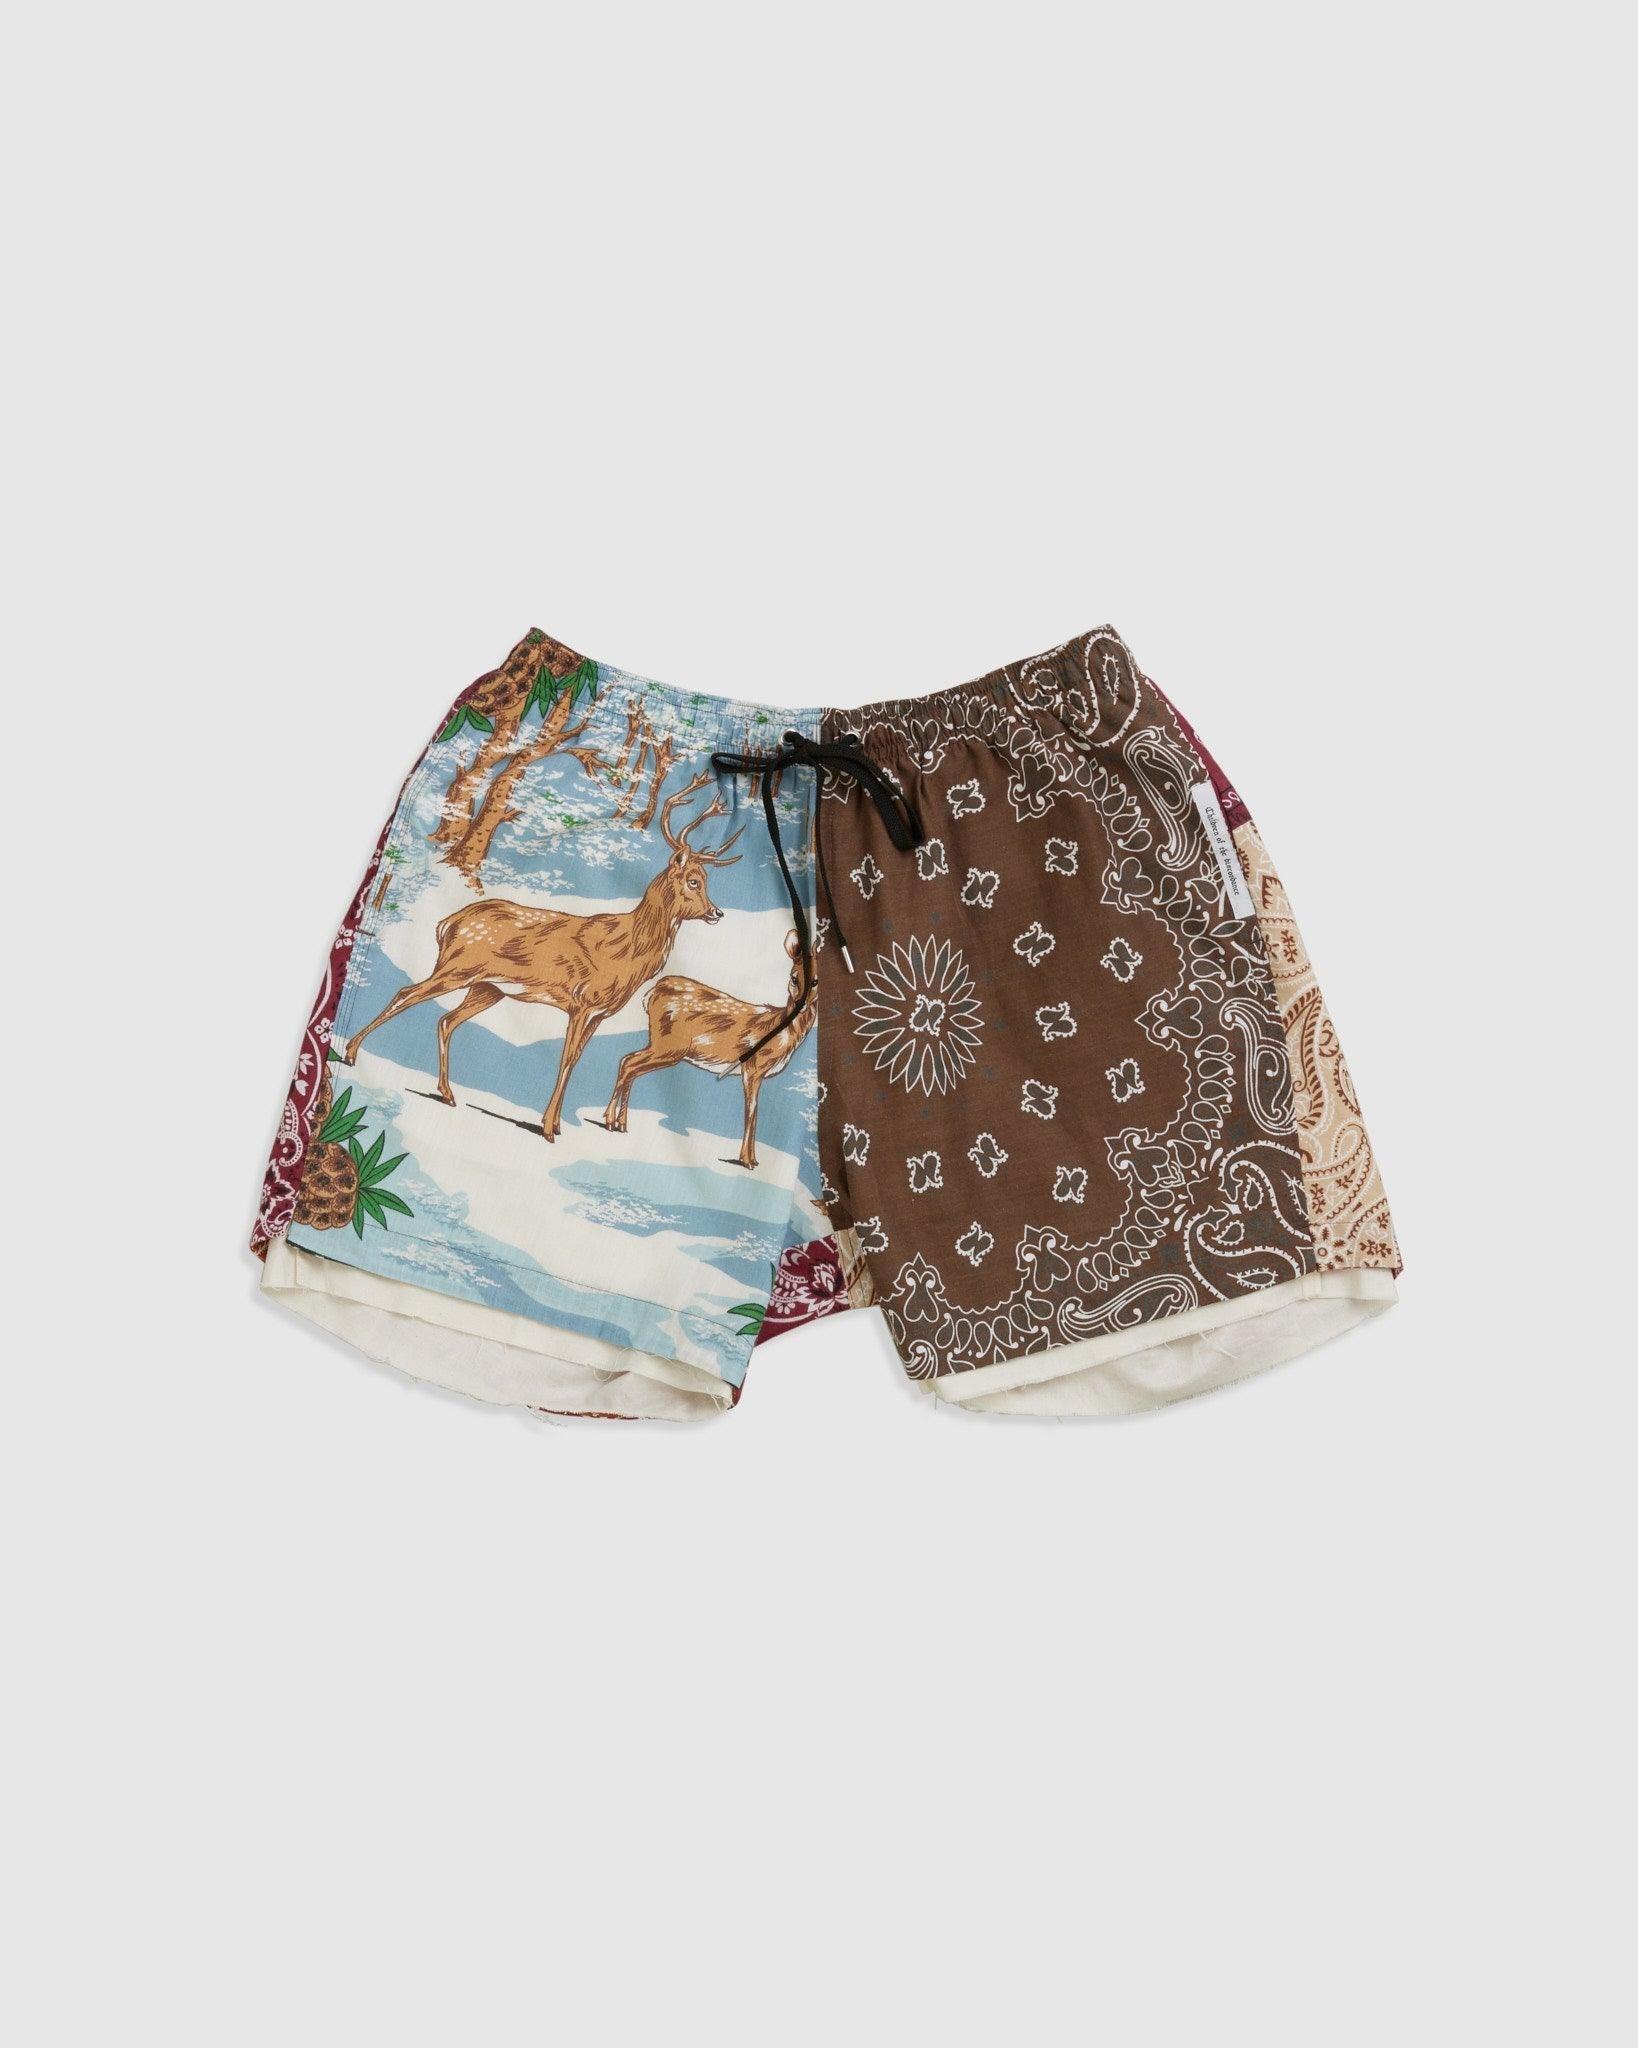 Bandana Patch Shorts - {{ collection.title }} - Chinatown Country Club 